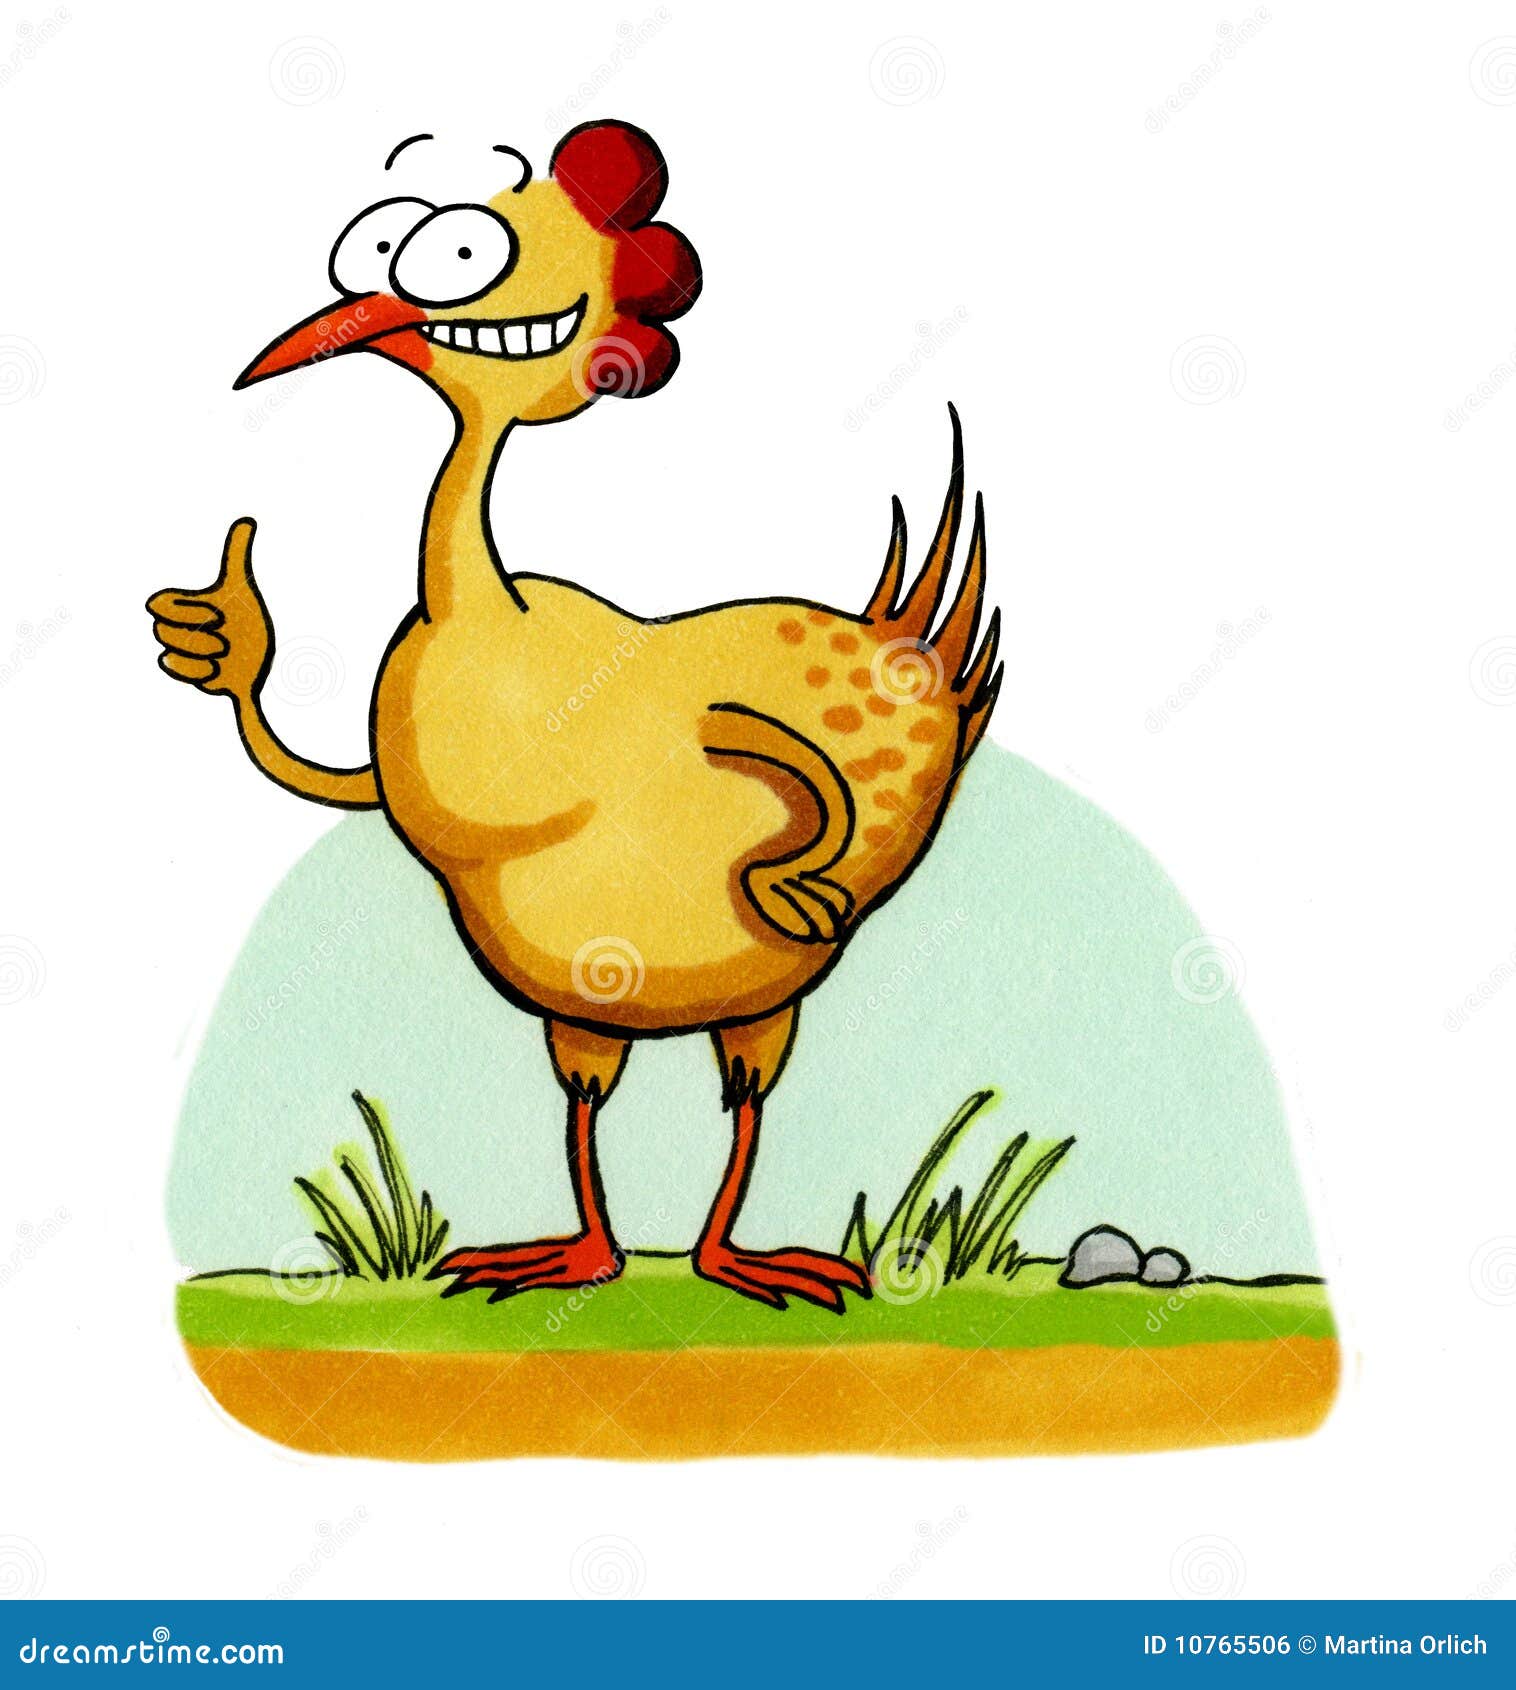 Smiling Chicken Funny Cartoon Royalty Free Stock Image - Image: 10765506